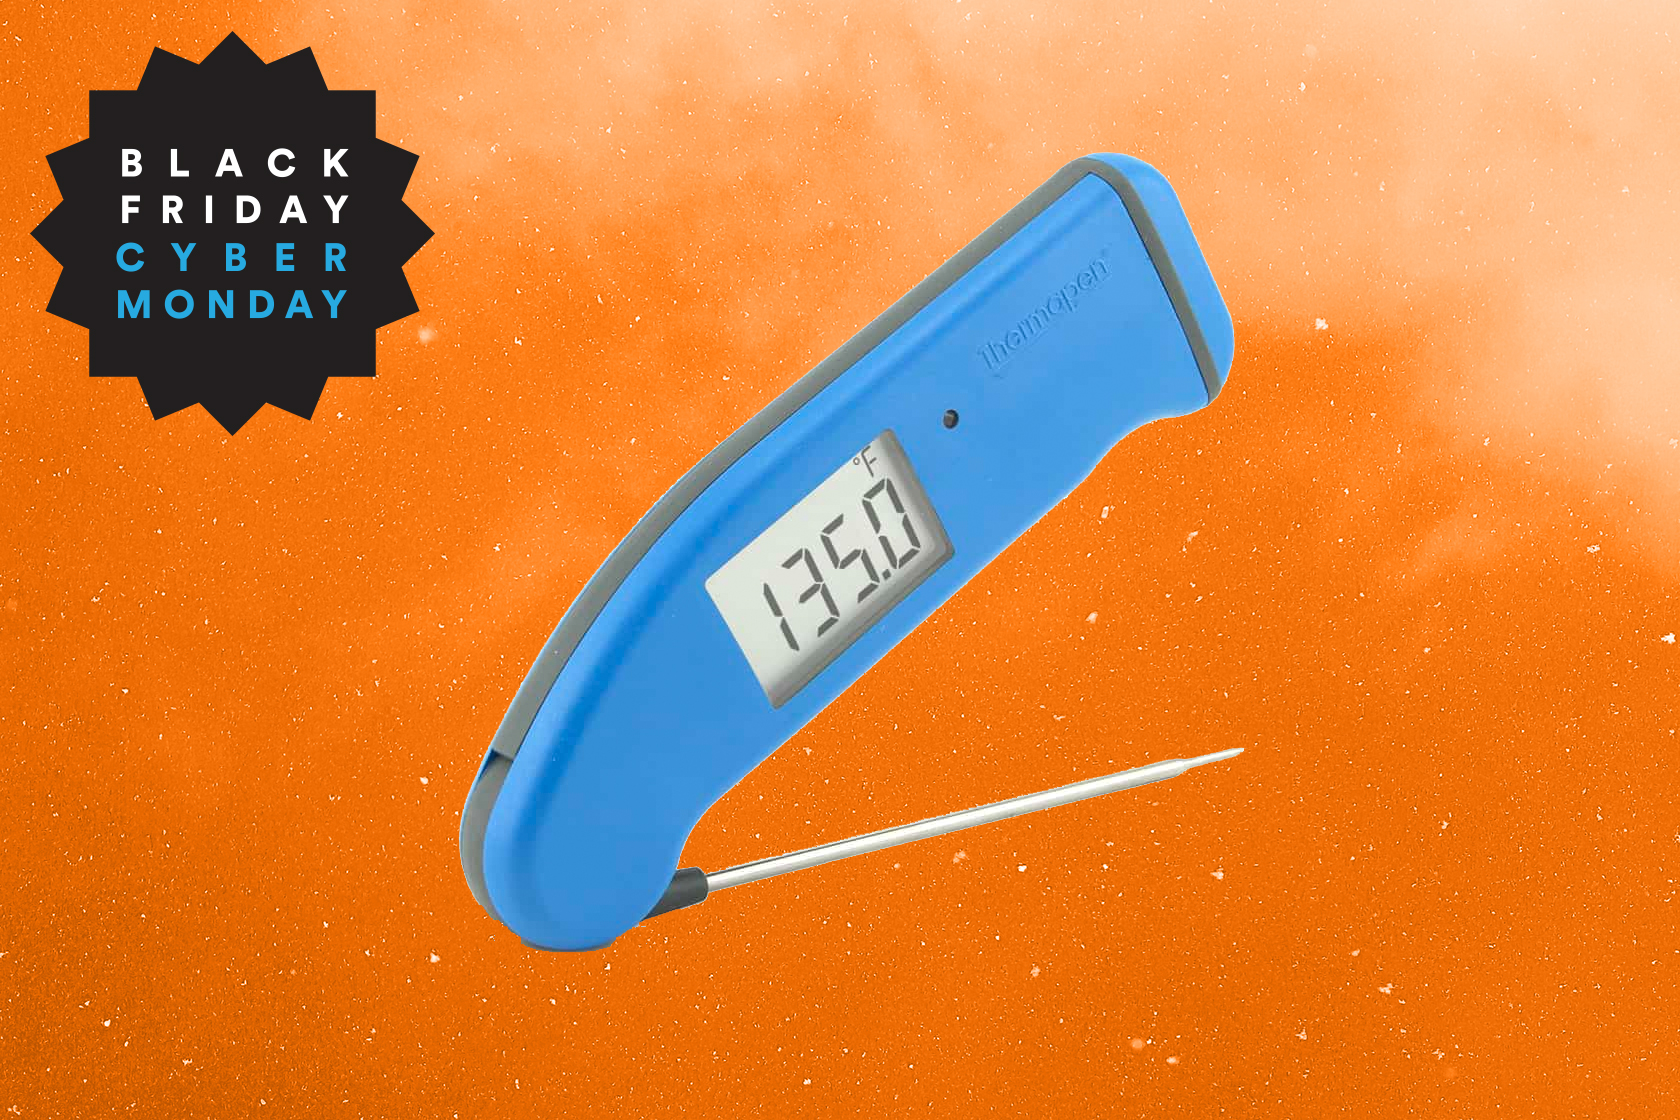 The highly rated Thermapen cooking thermometer is 25% off for